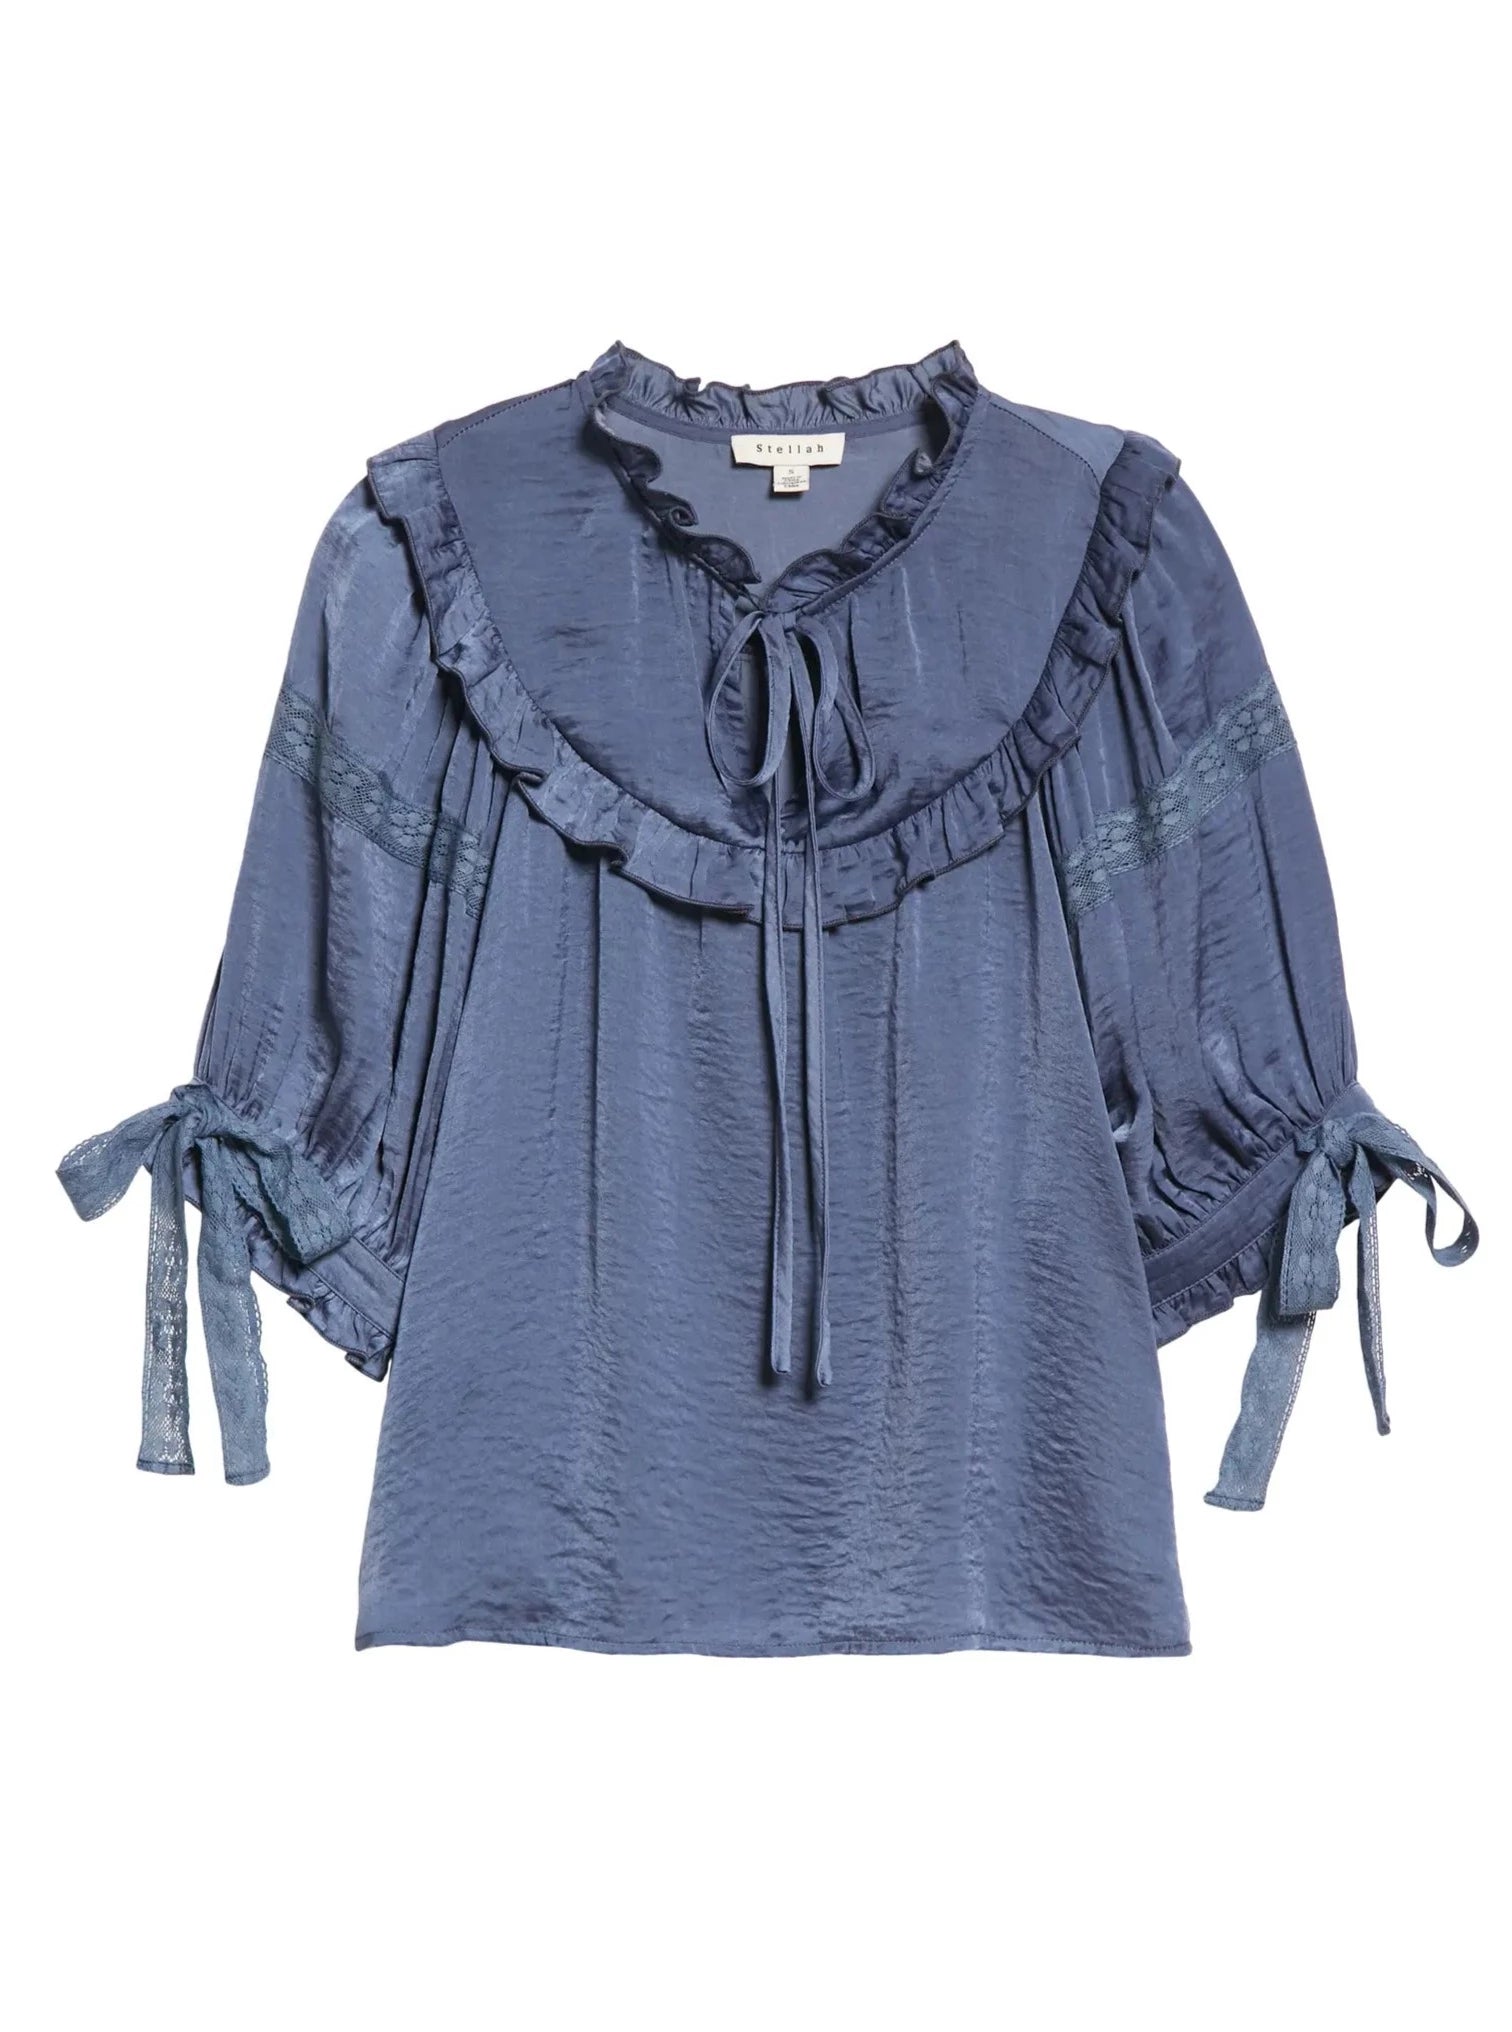 Cressida Ruffle Top (XS) in blue and ivory